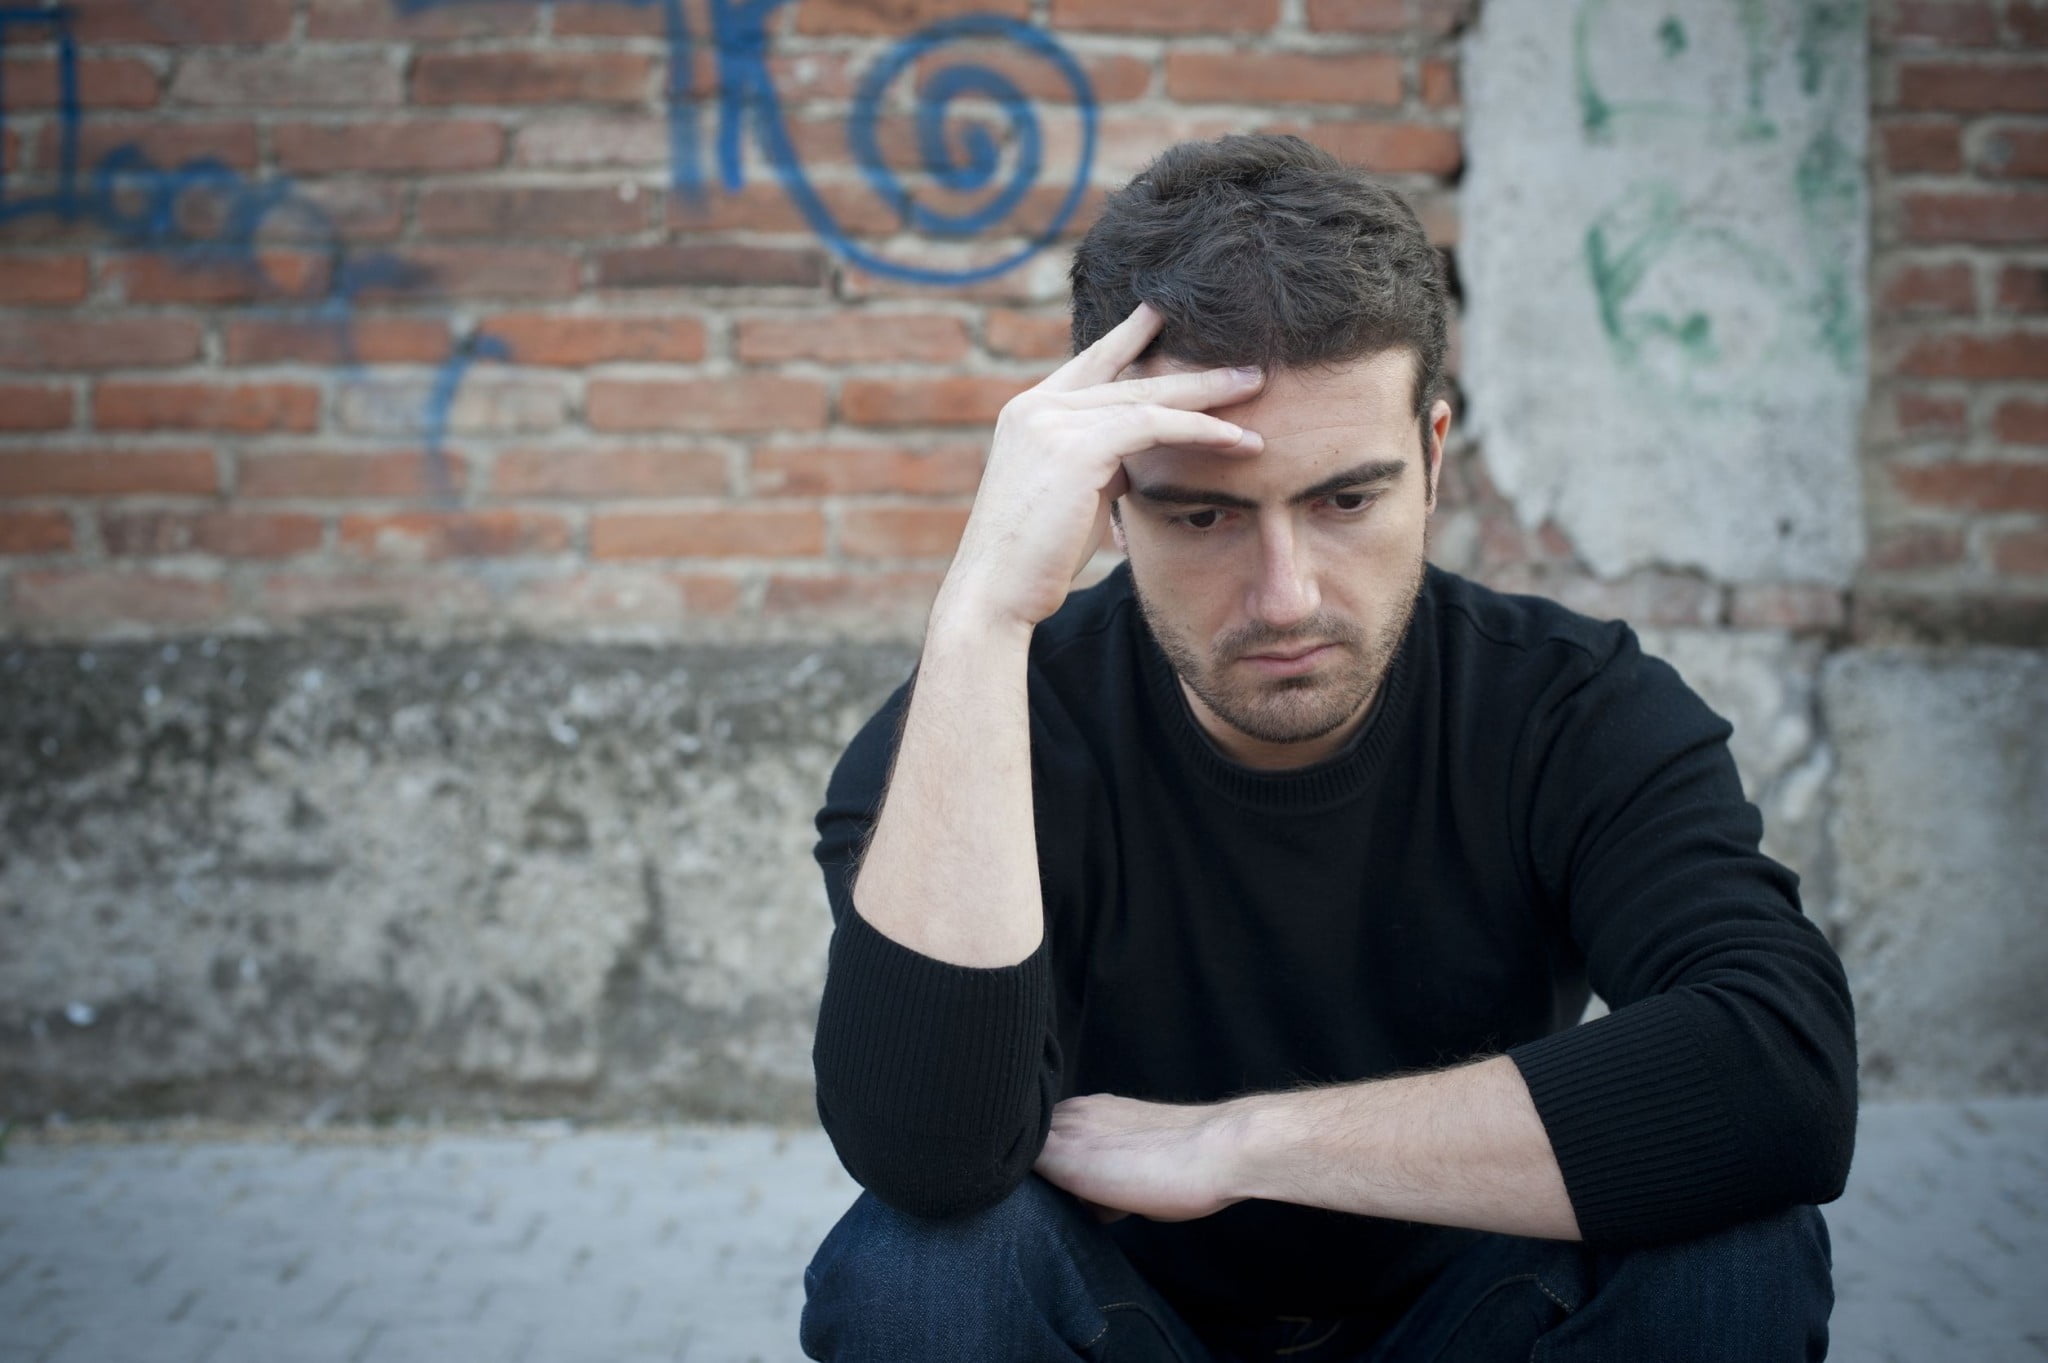 sad man in front of graffitied wall: harm minimisation story